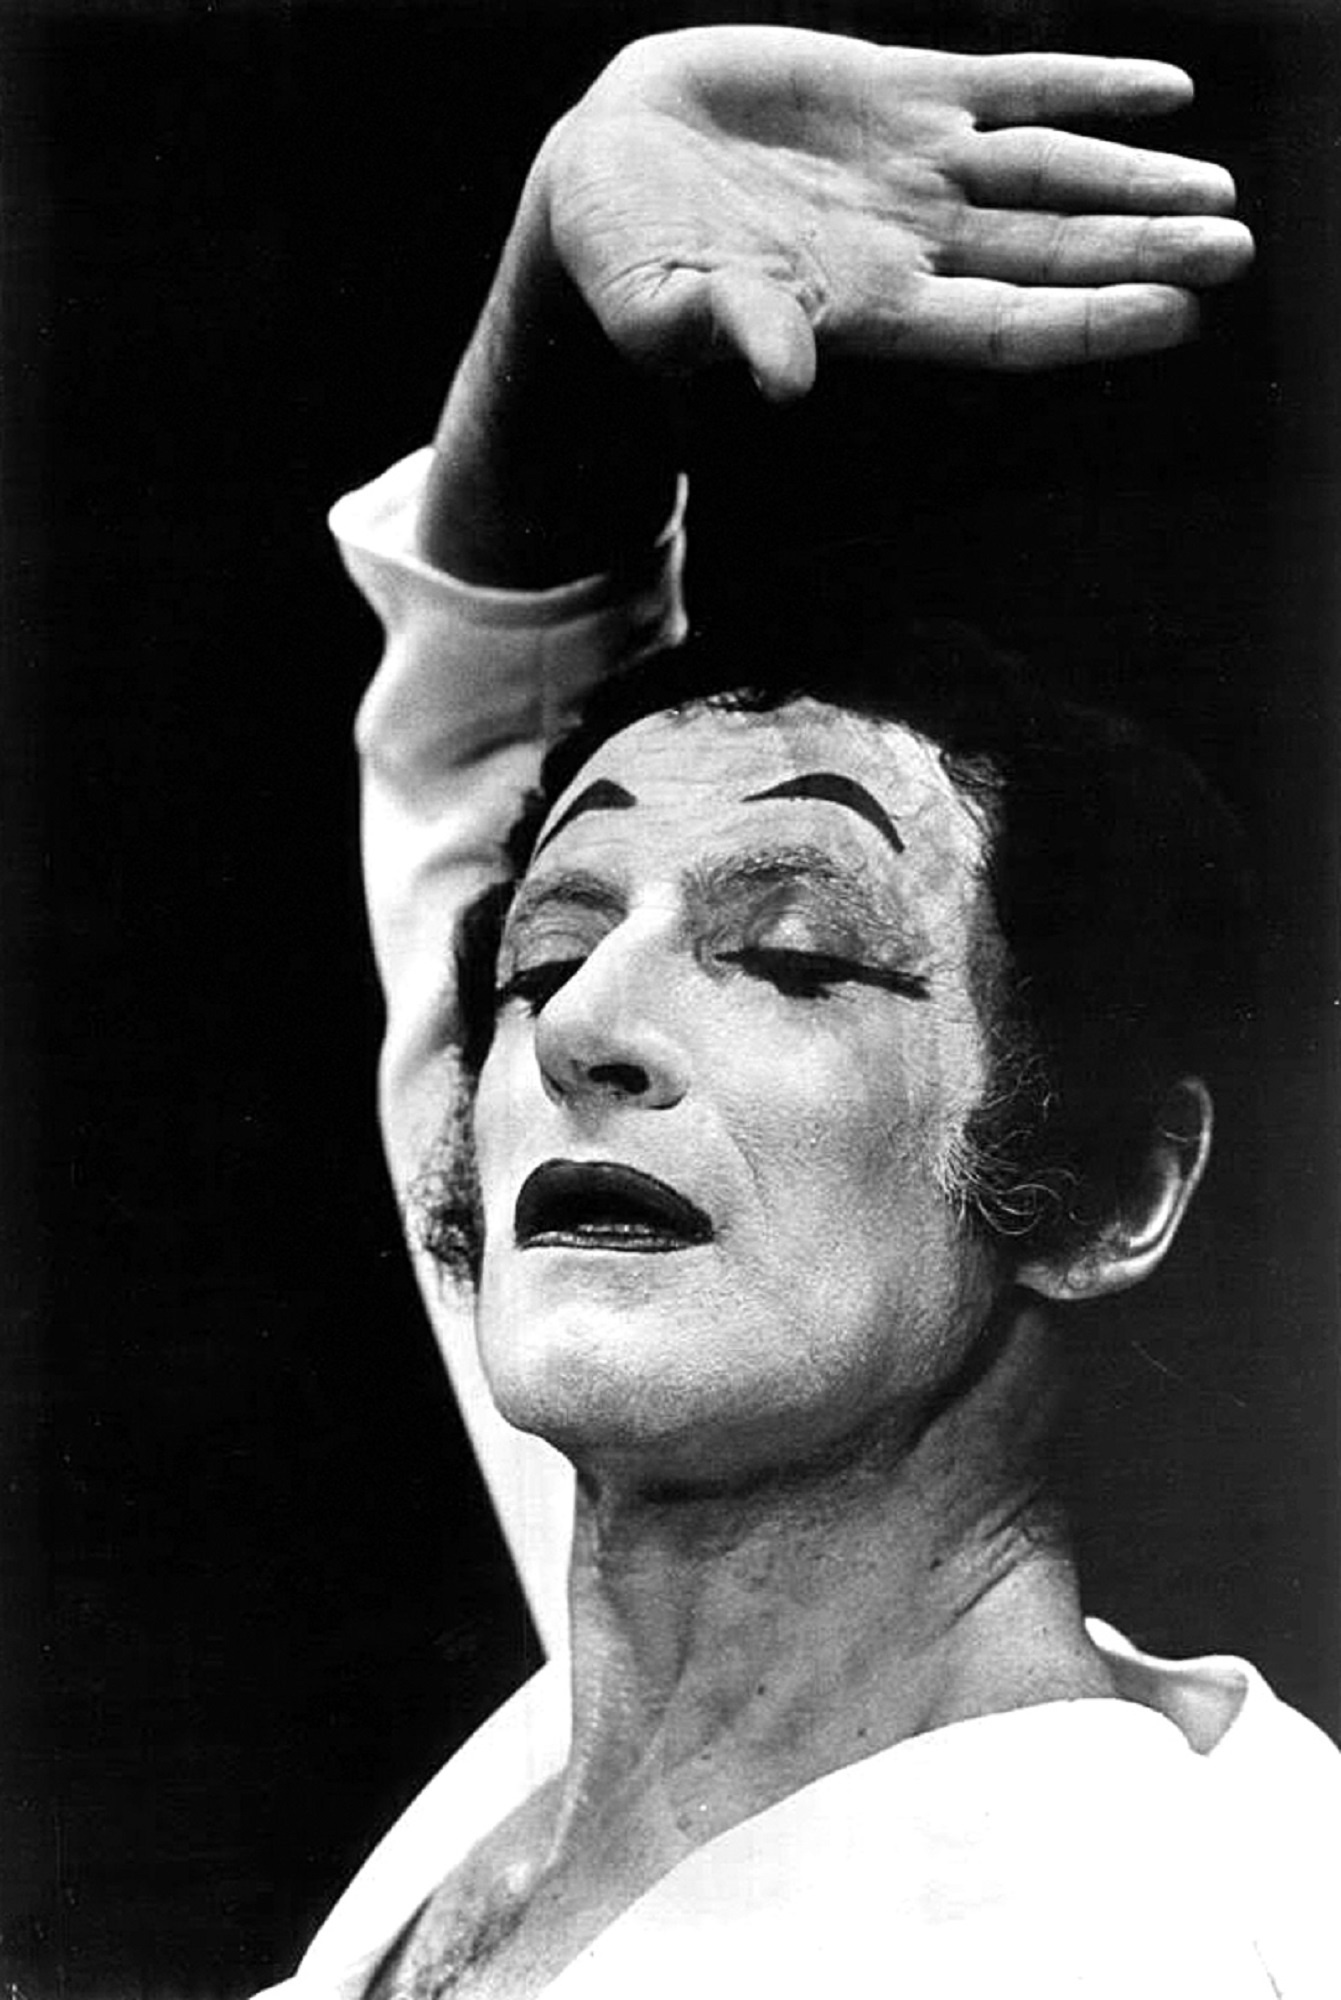 Marcel Marceau: Hand, Black and white, Performer, Facial expression, French, Famous, Entertainment, Actor, Mime, Monochrome, Art of Silence, Bip the Clown. 1350x2000 HD Background.